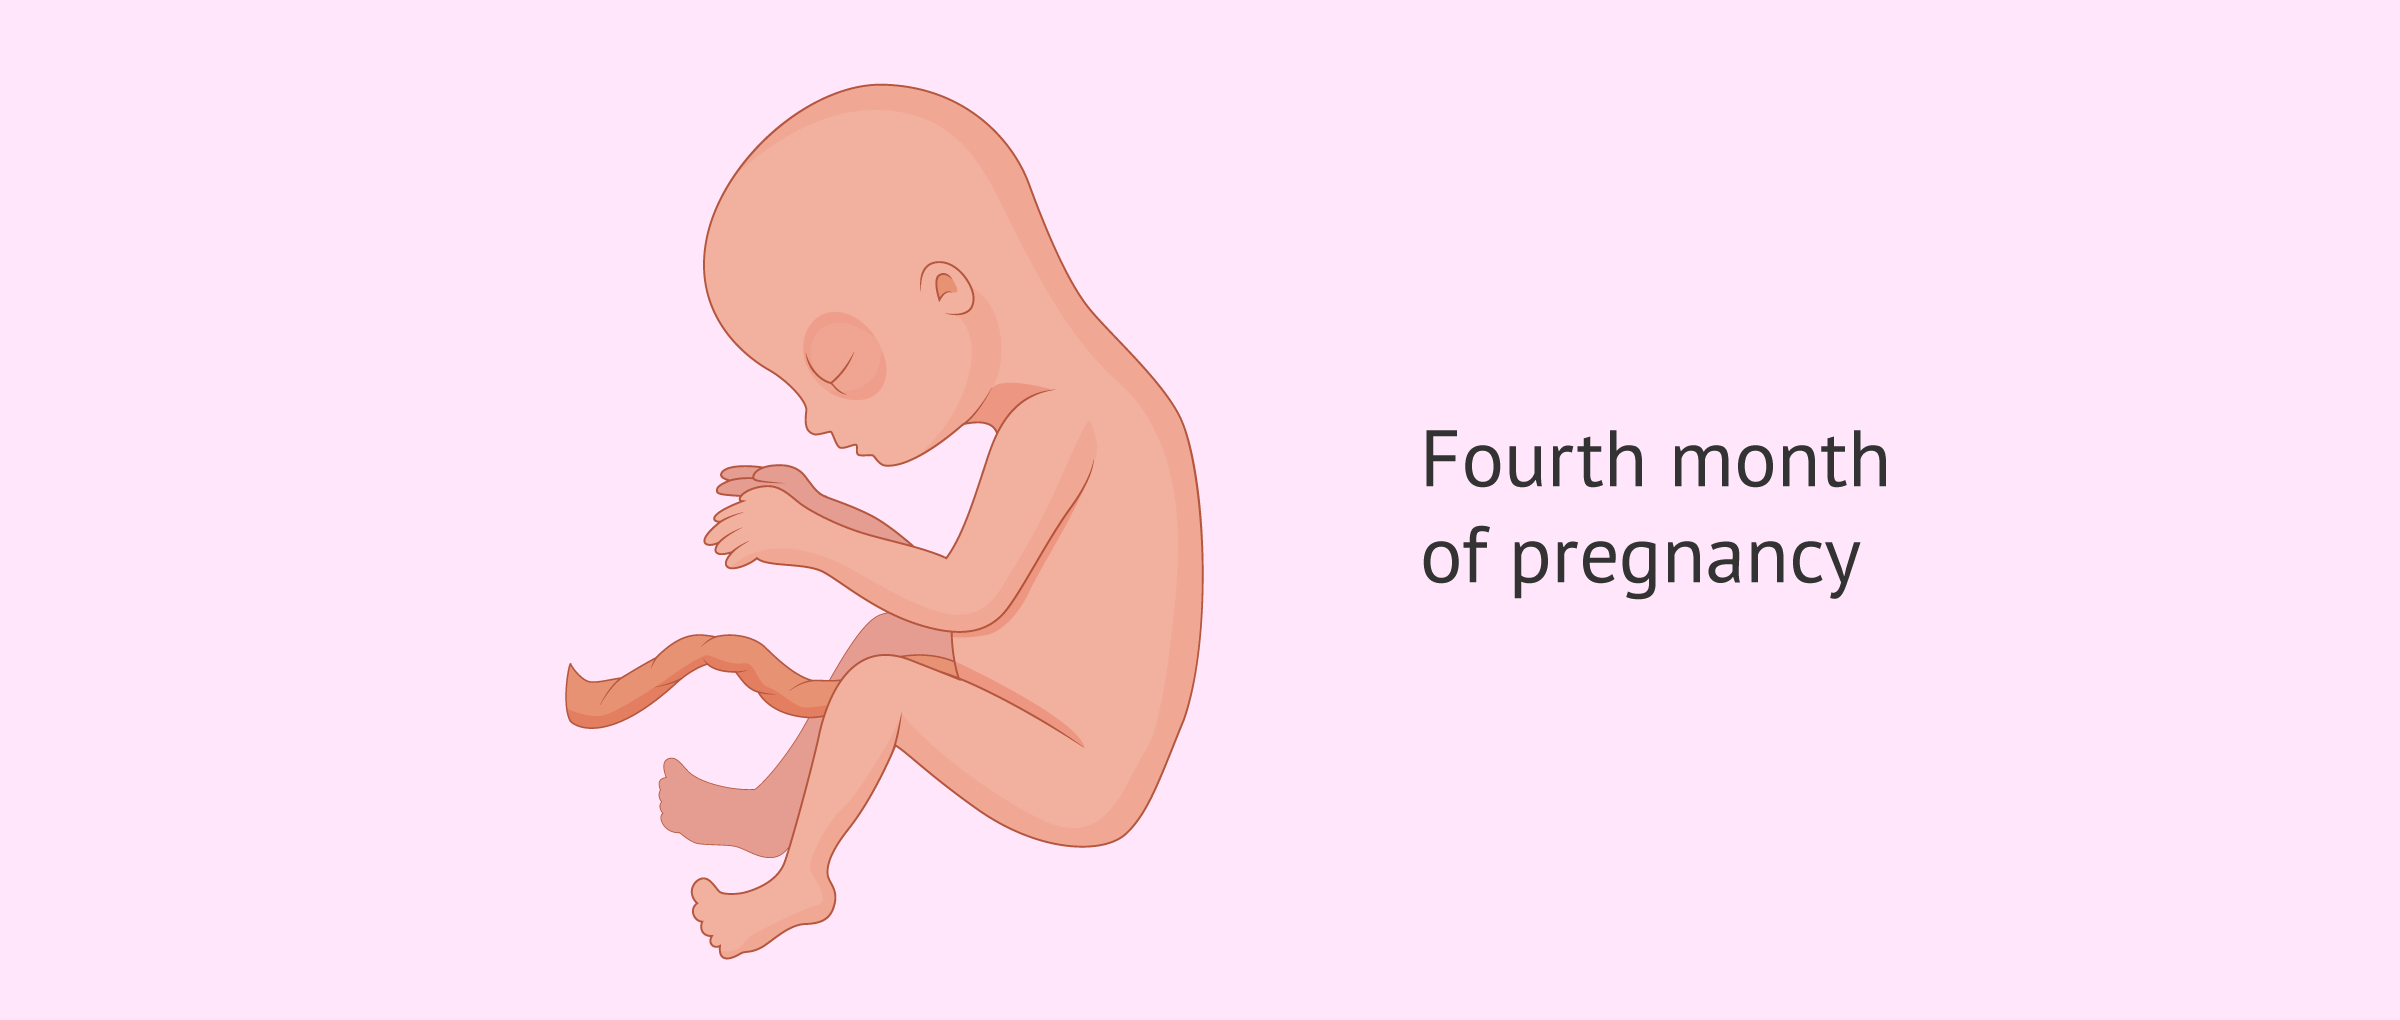 Picture of fetus at 4 months